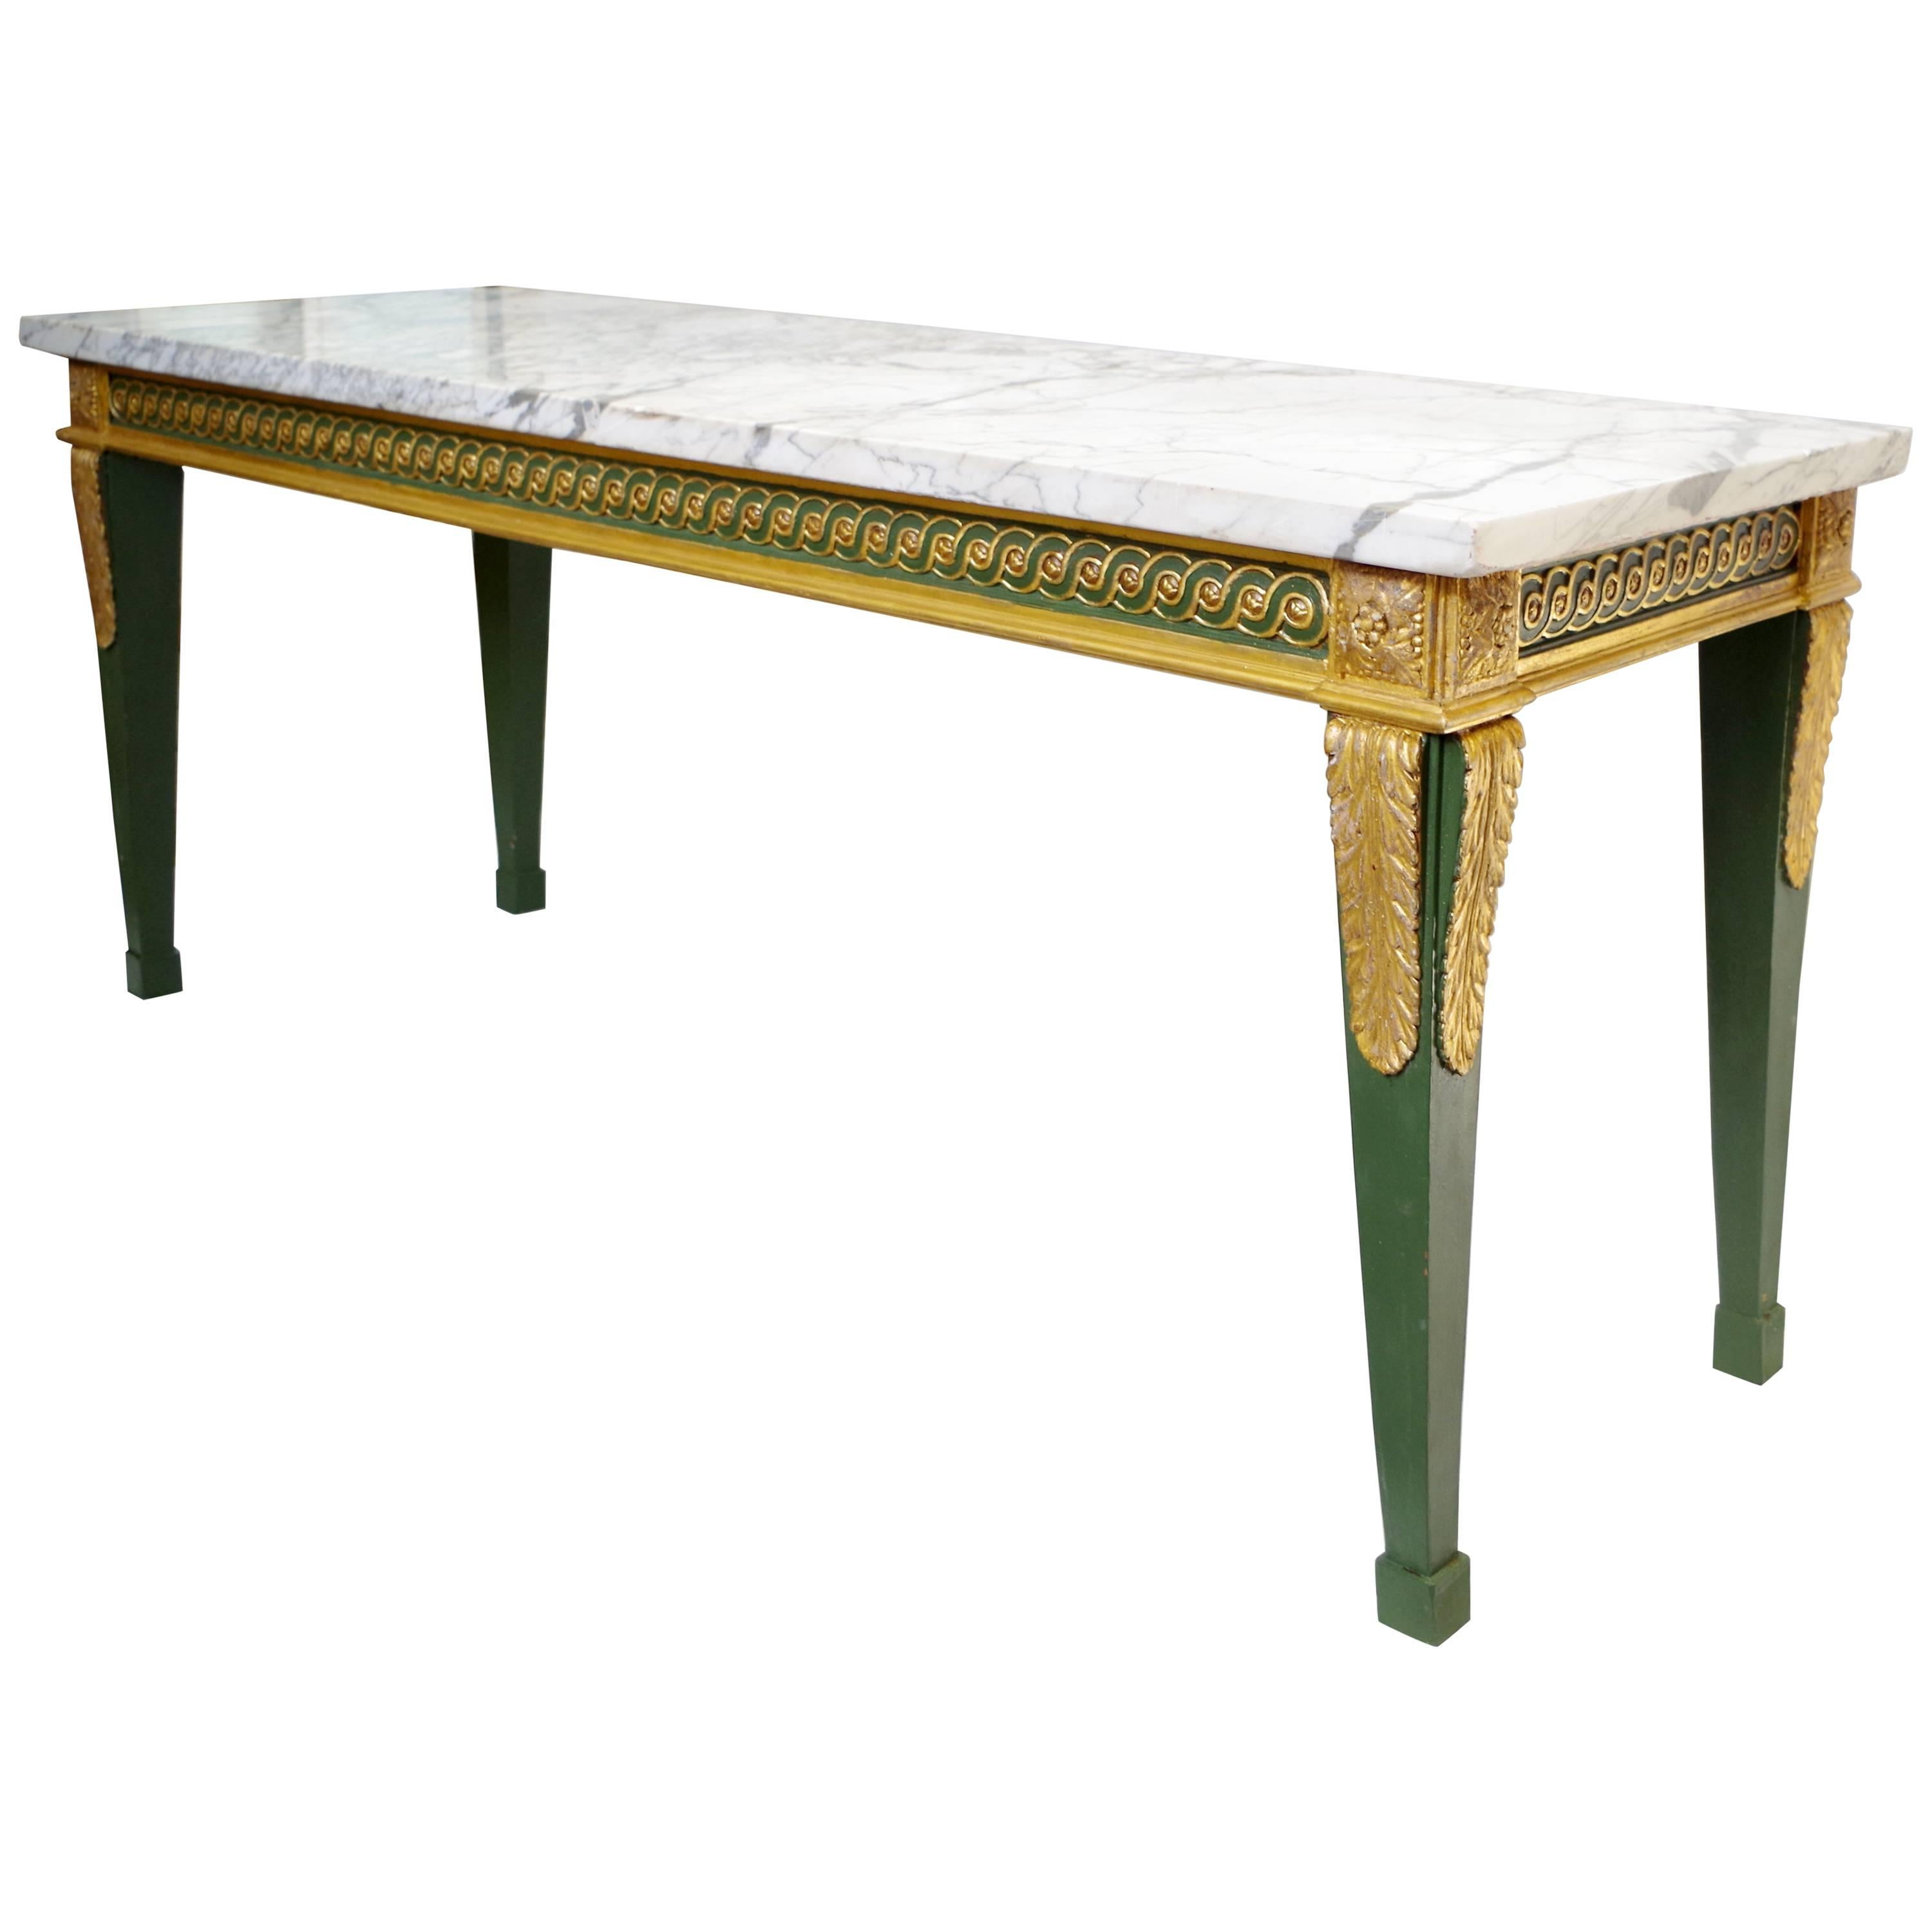 Louis XVI Style Console Table in Green Lacquered and Gilded Wood, 19th Century